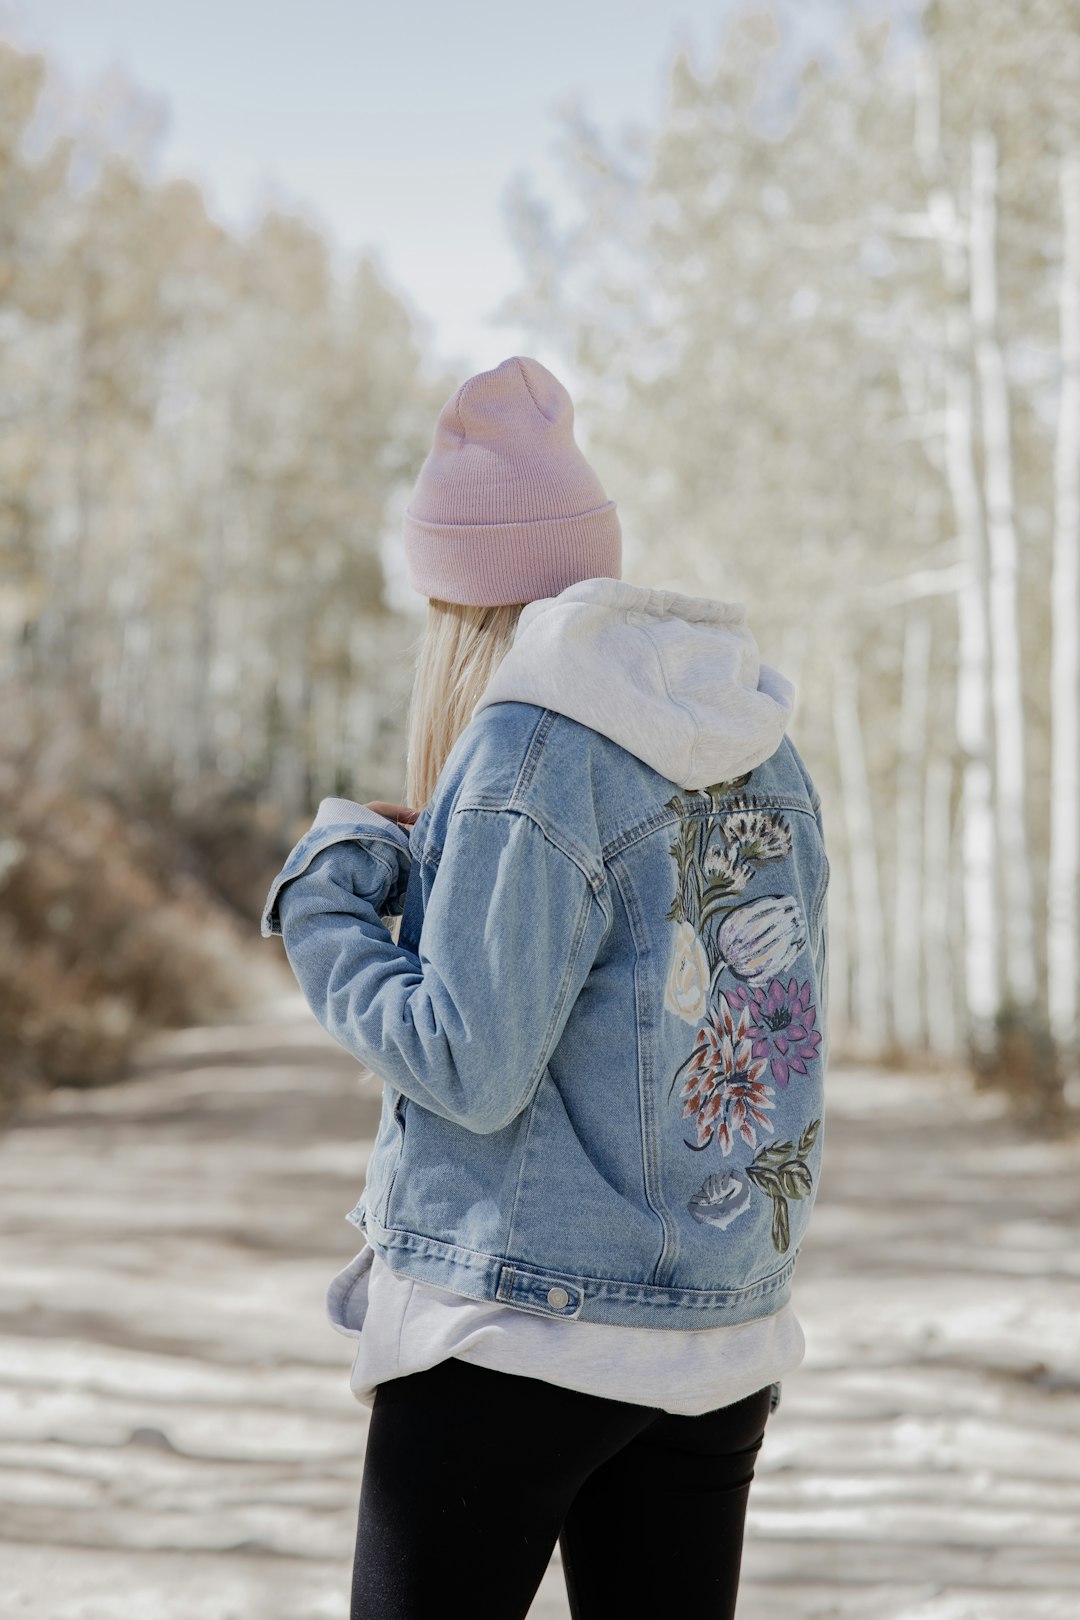 girl in pink knit cap and blue denim jacket standing on snow covered ground during daytime